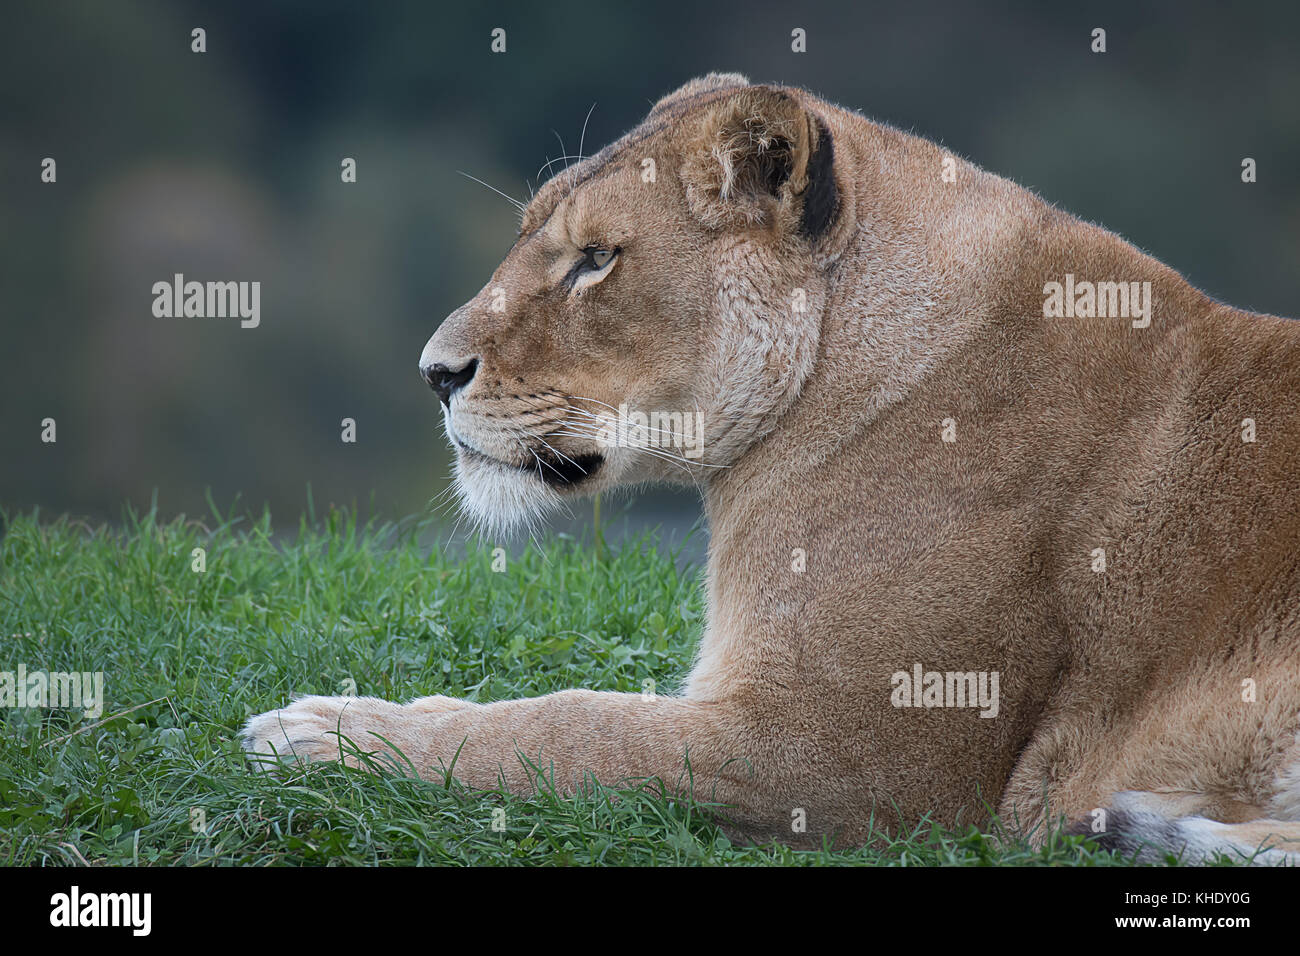 A close up half length portrait in profile of a lioness lying on grass staring to the left in an alert inquisitive way Stock Photo